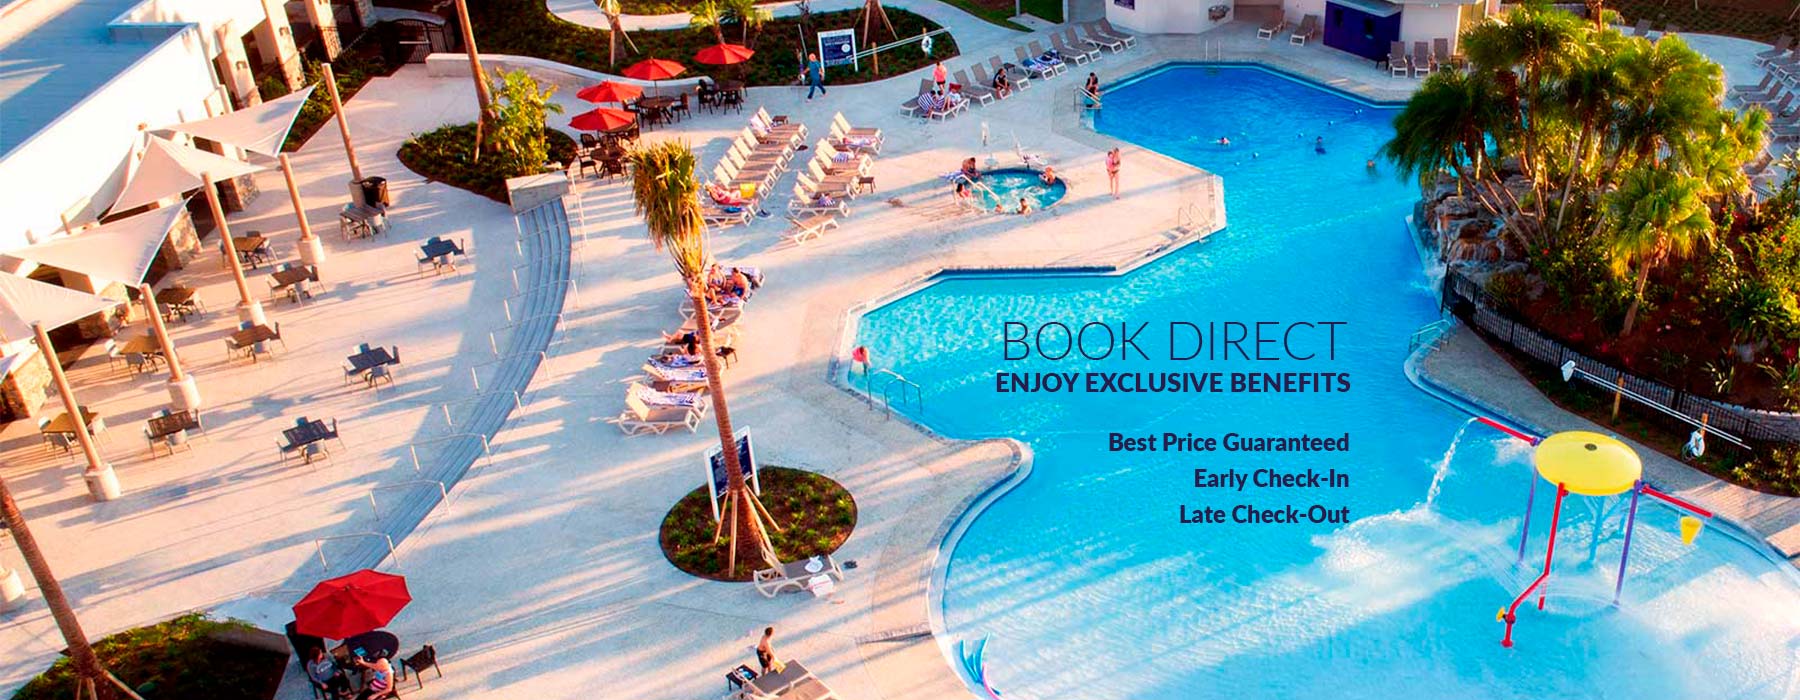 Book Direct and Enjoy Exclusive Benefits